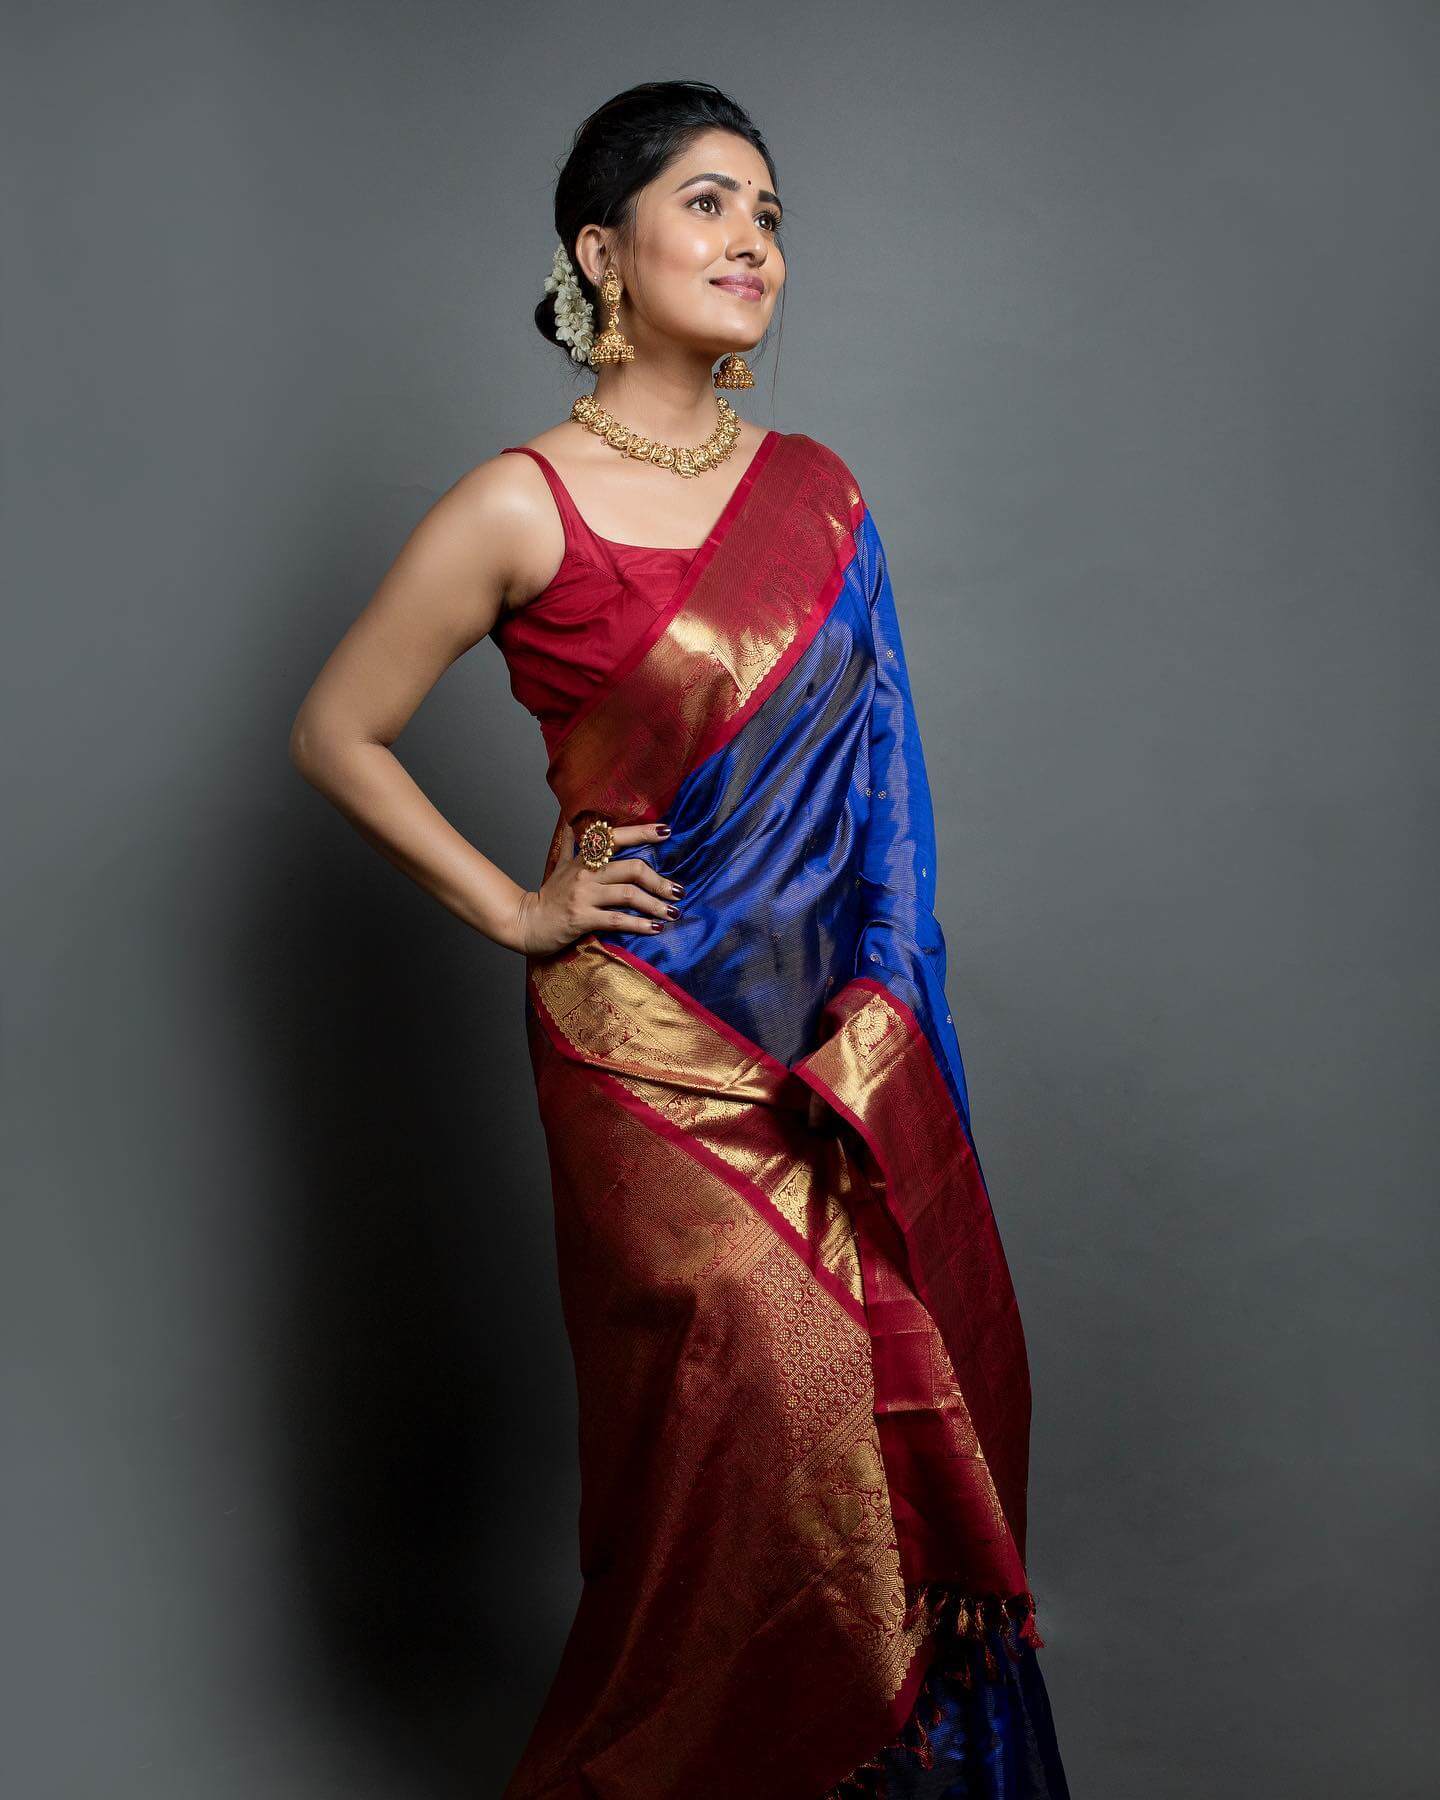 Vani Bhoja Look Stunningly Charming In Blue & Red Gold Blend Silk Saree With Sleeveless Blouse